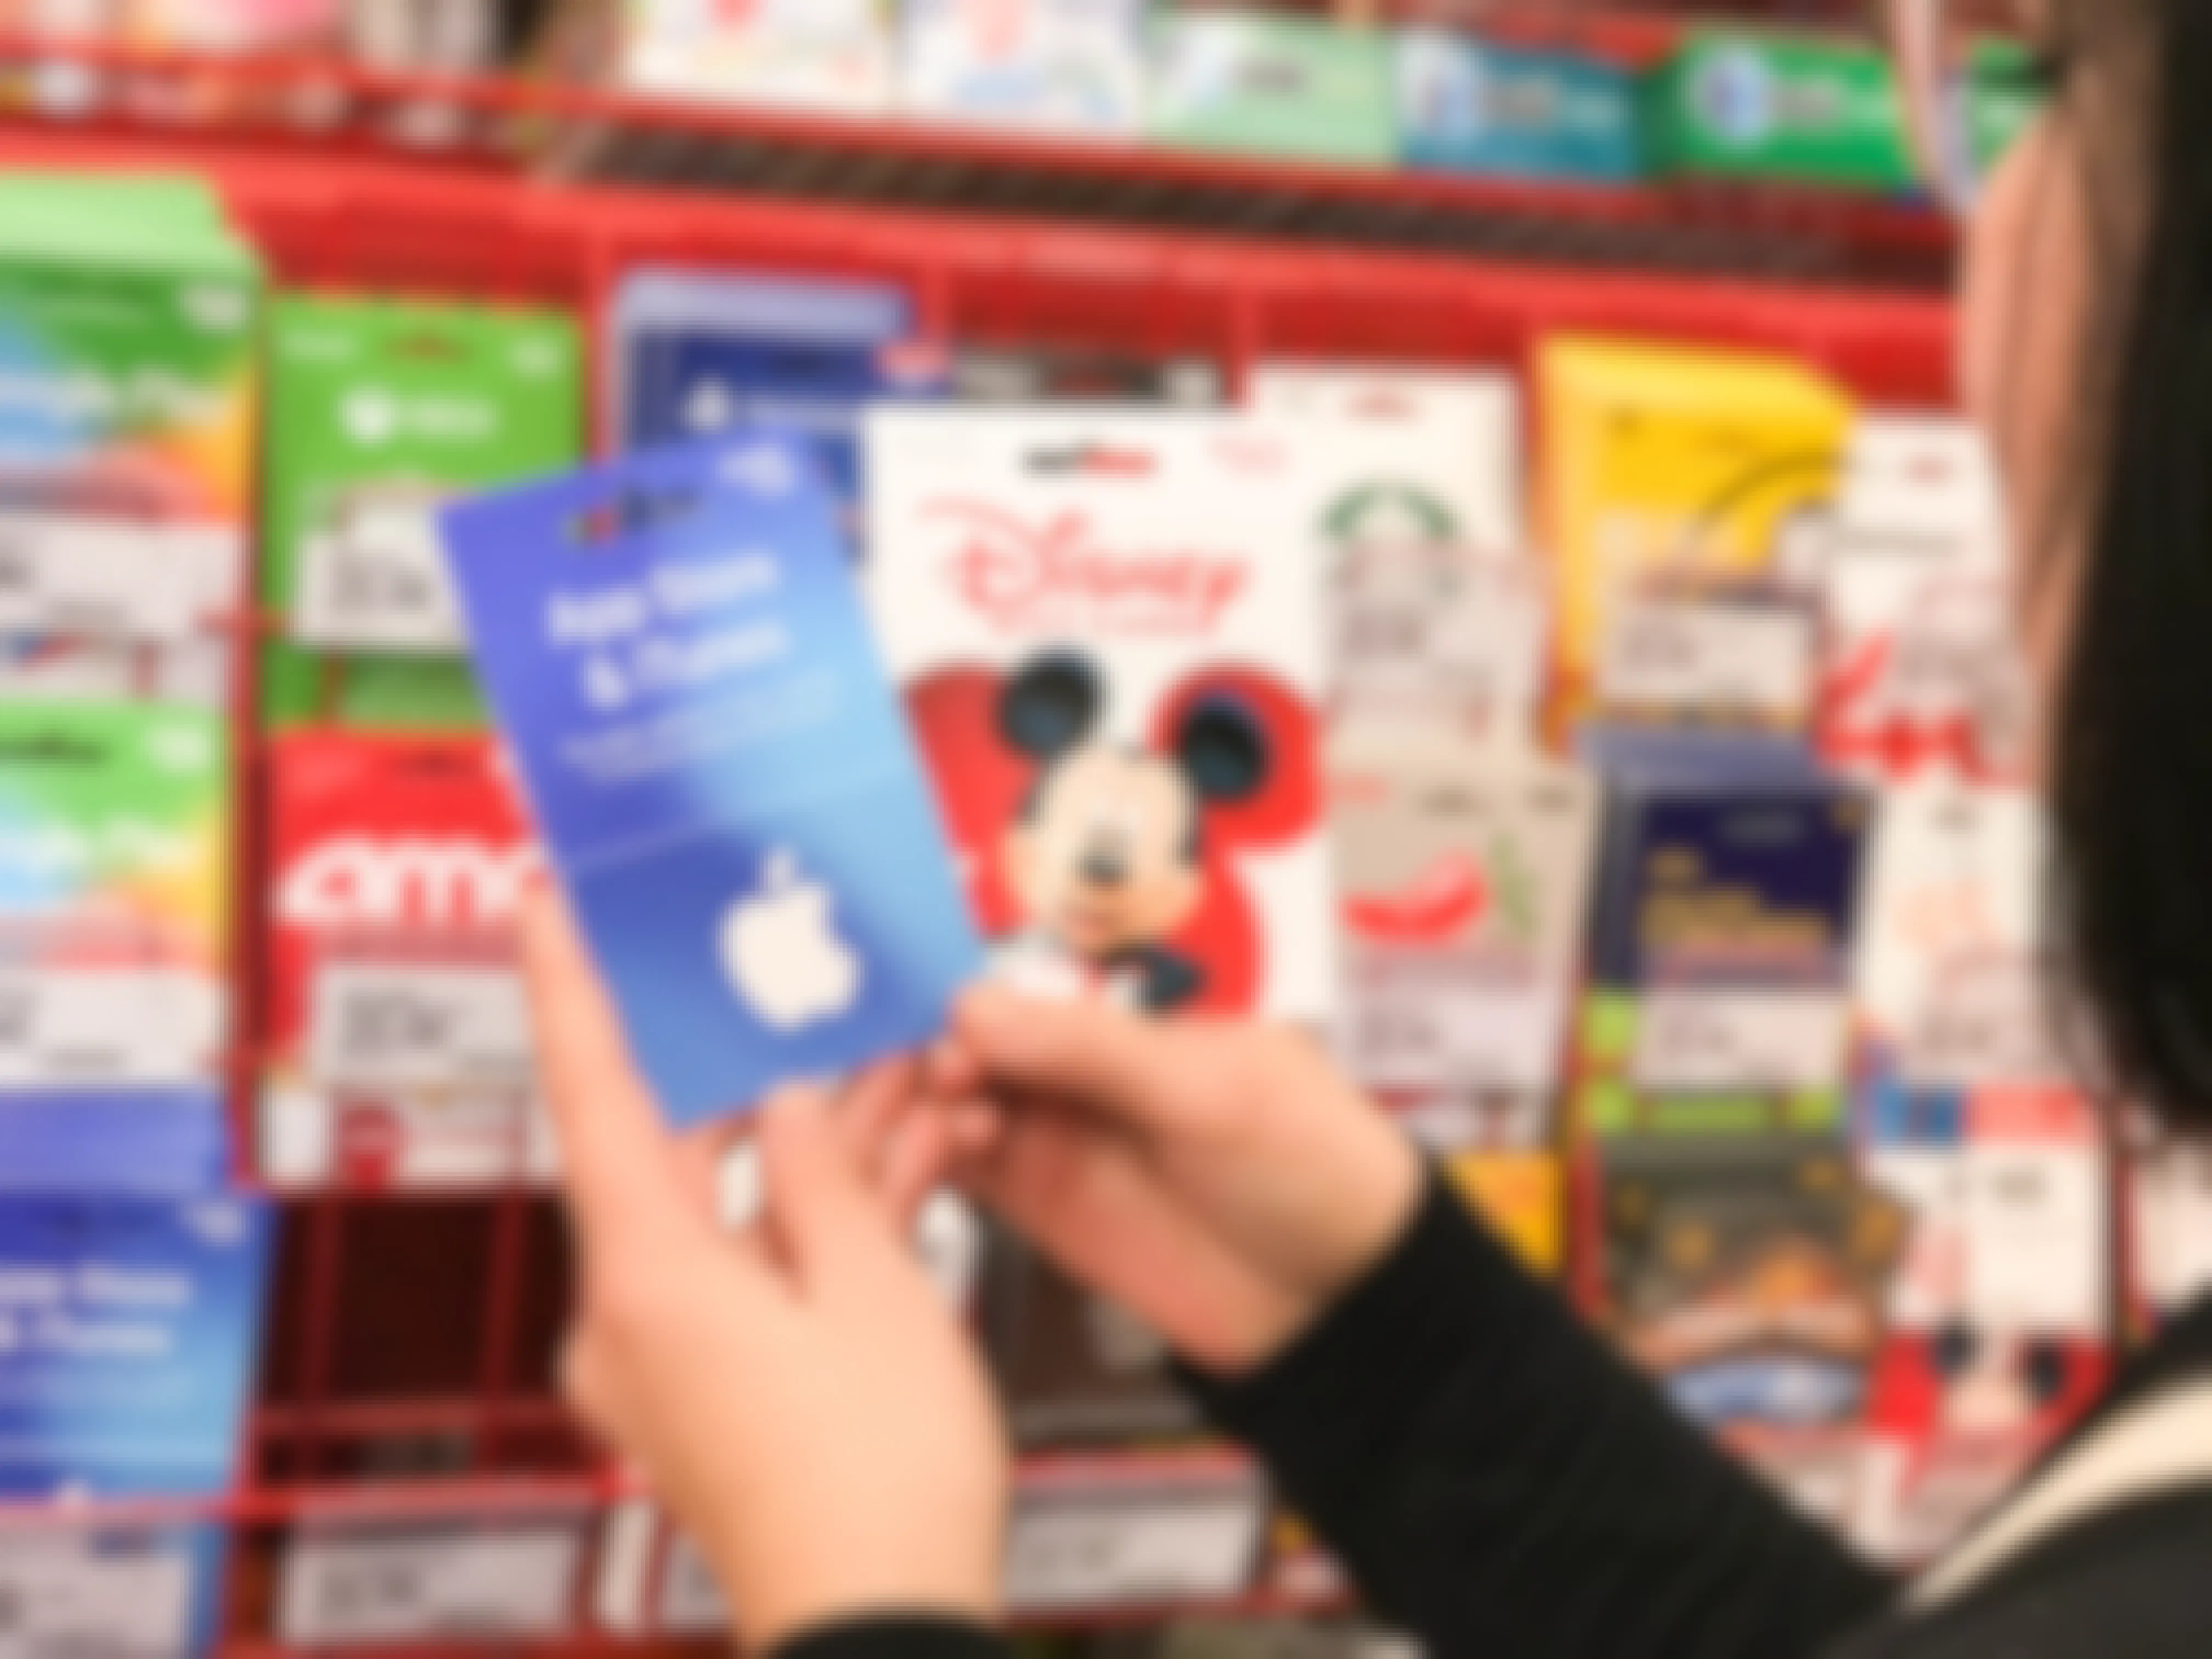 A person holding up two gift cards, one for Disney and one for the Apple App Store & iTunes, in front of the gift card display at Target.